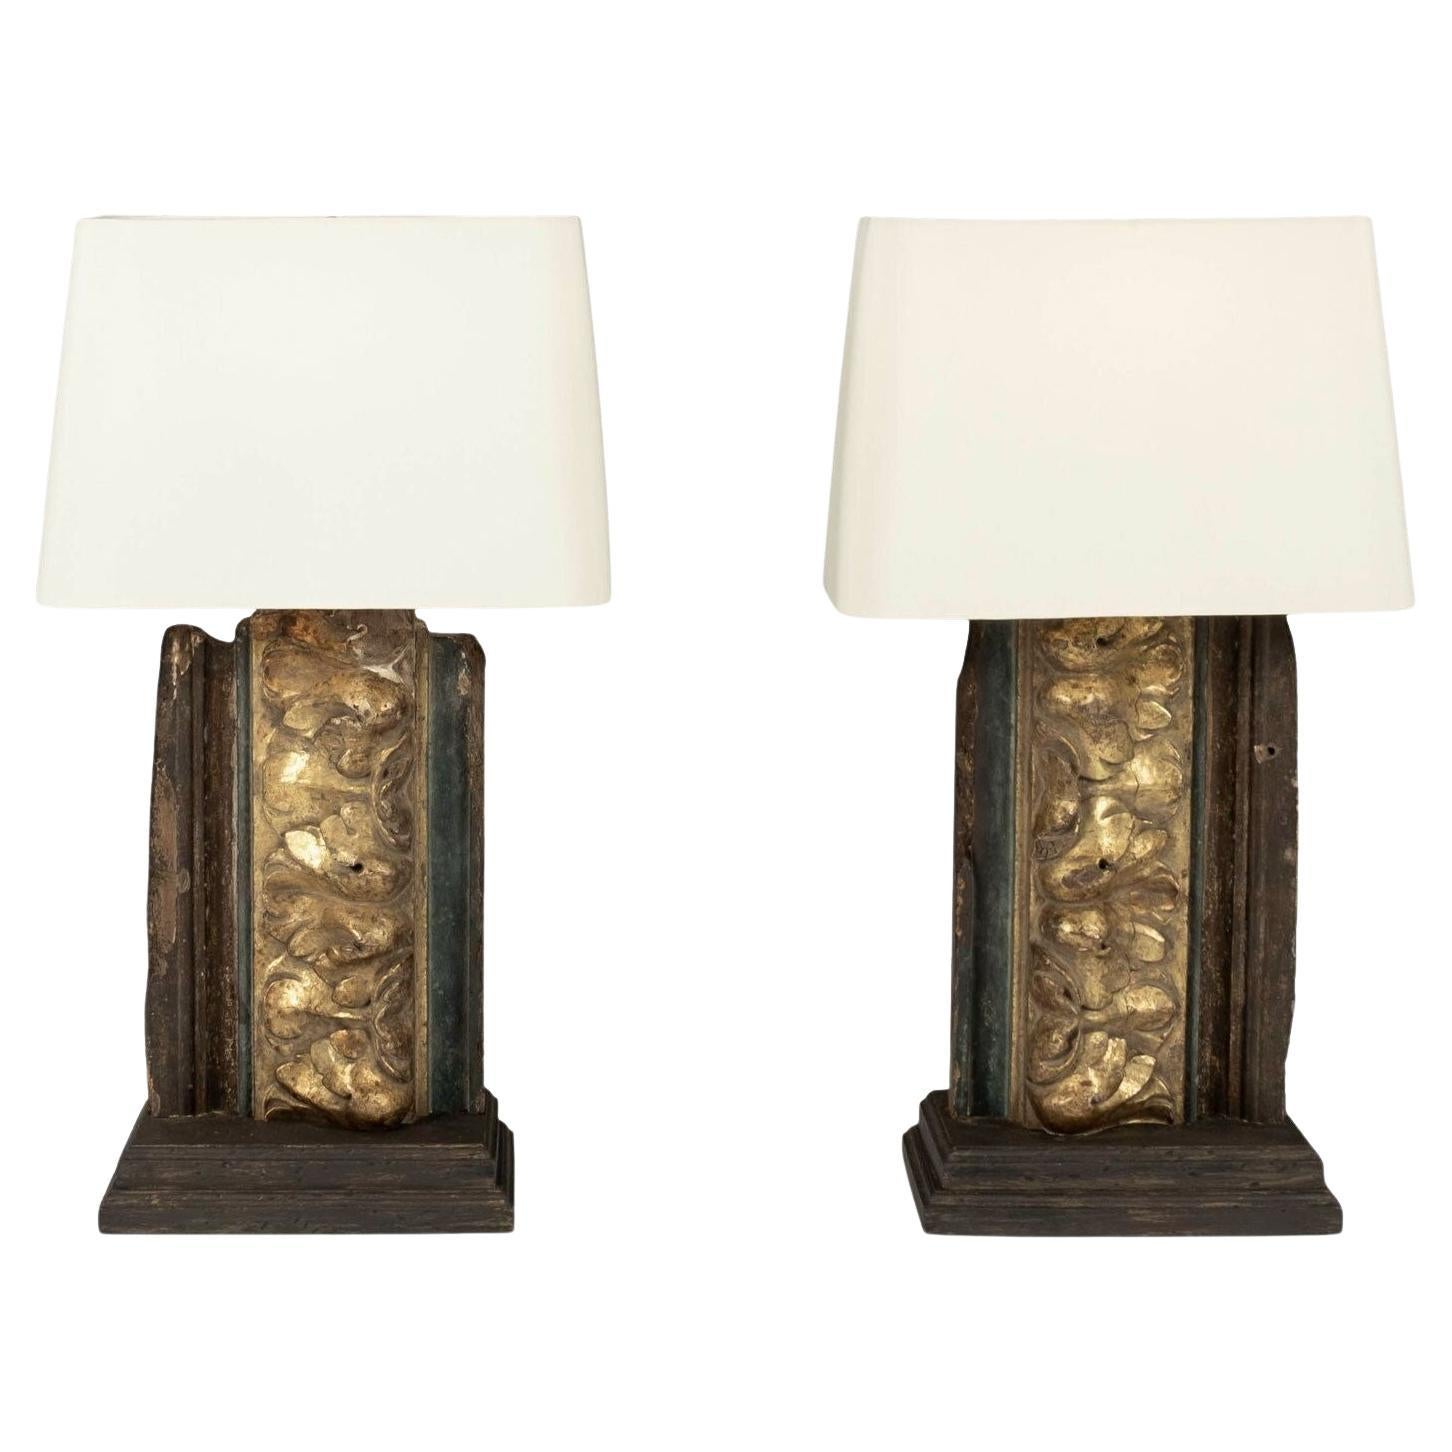 Pair of Giltwood Architectural Fragment Lamps